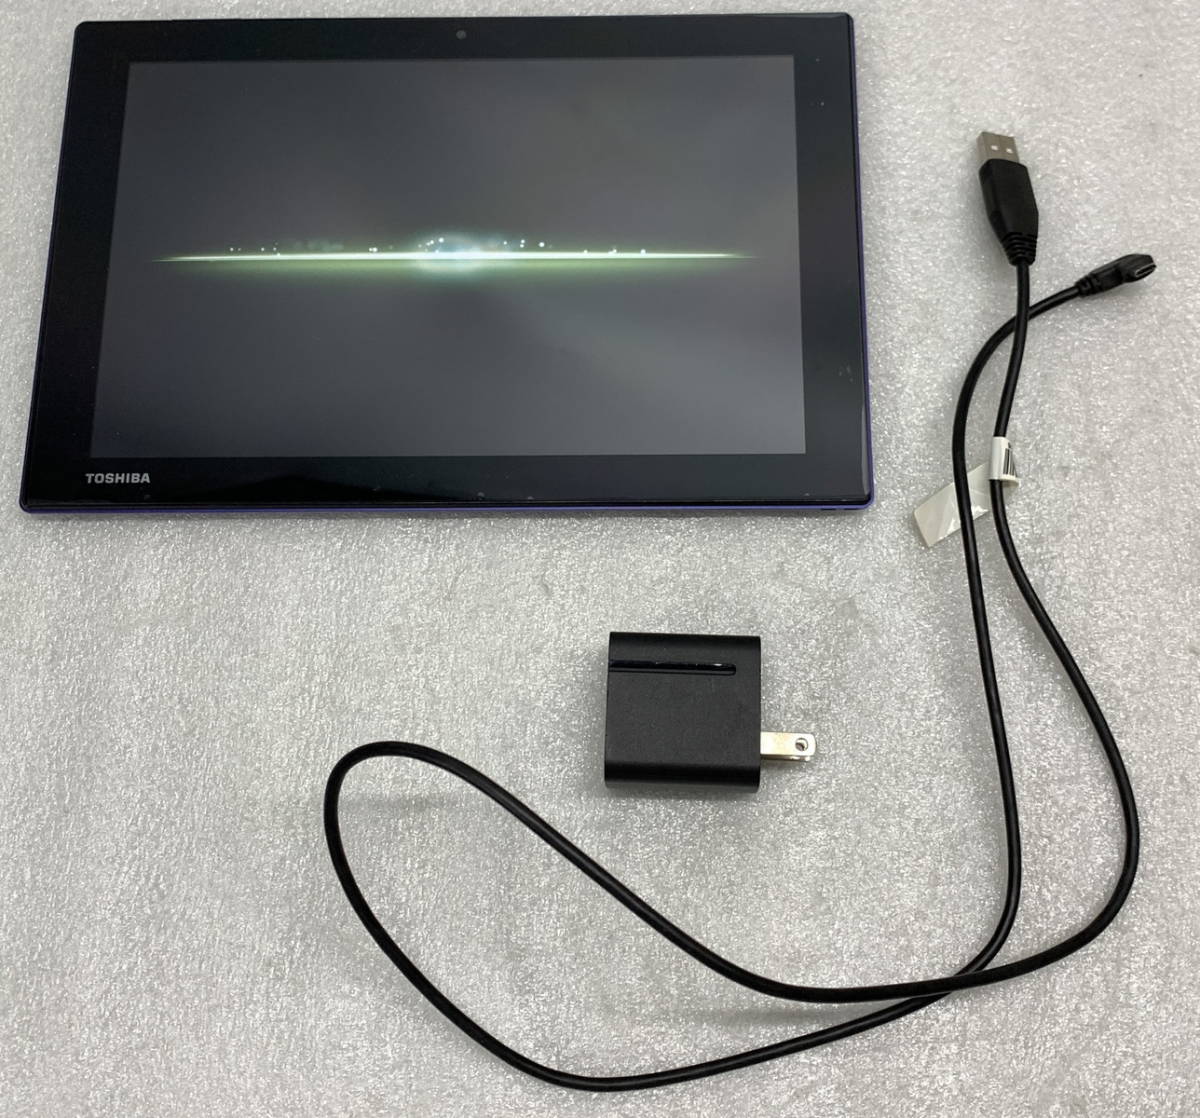 ◇ TOSHIBA タブレット [ A205 ] OS:Android5 【動作確認/初期化済み】 【使用感/傷汚れあり】 東芝 / 中古(S240205_6)_画像9